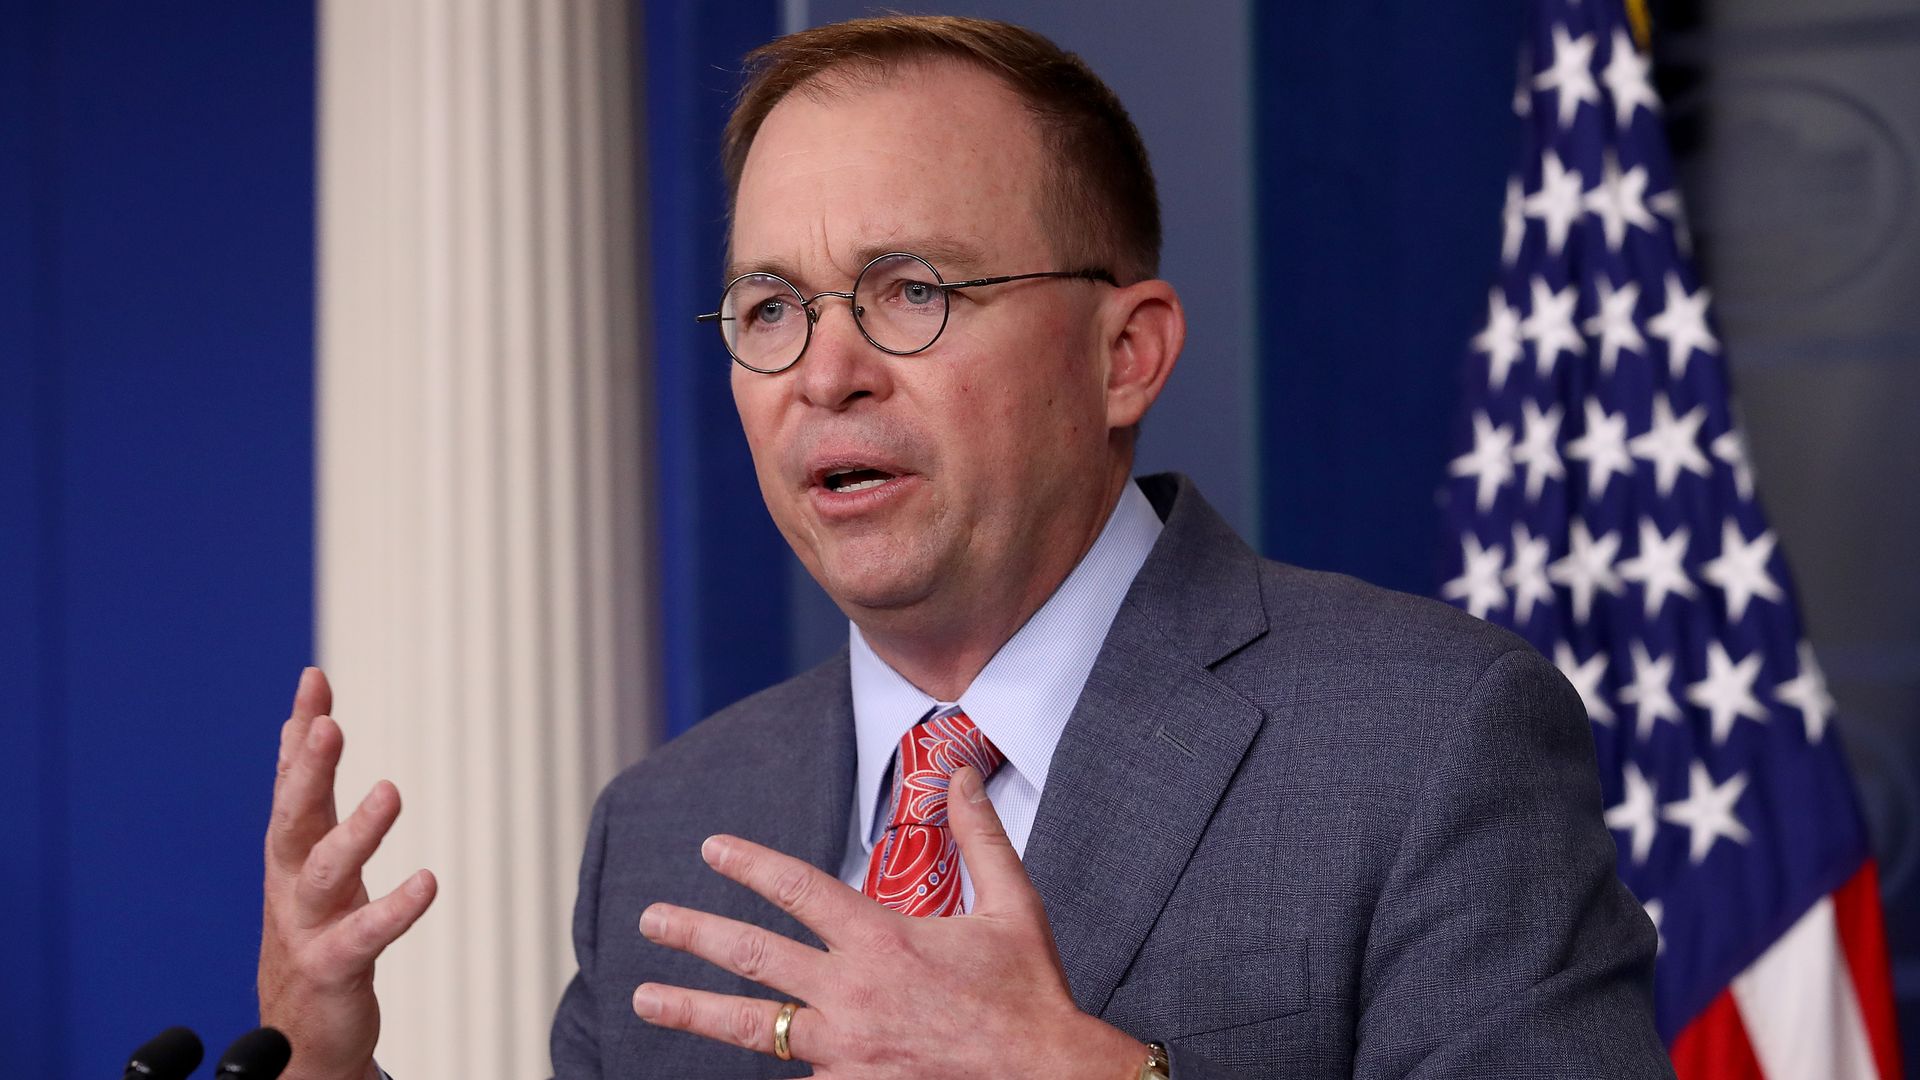 Mulvaney at the press podium at the white house